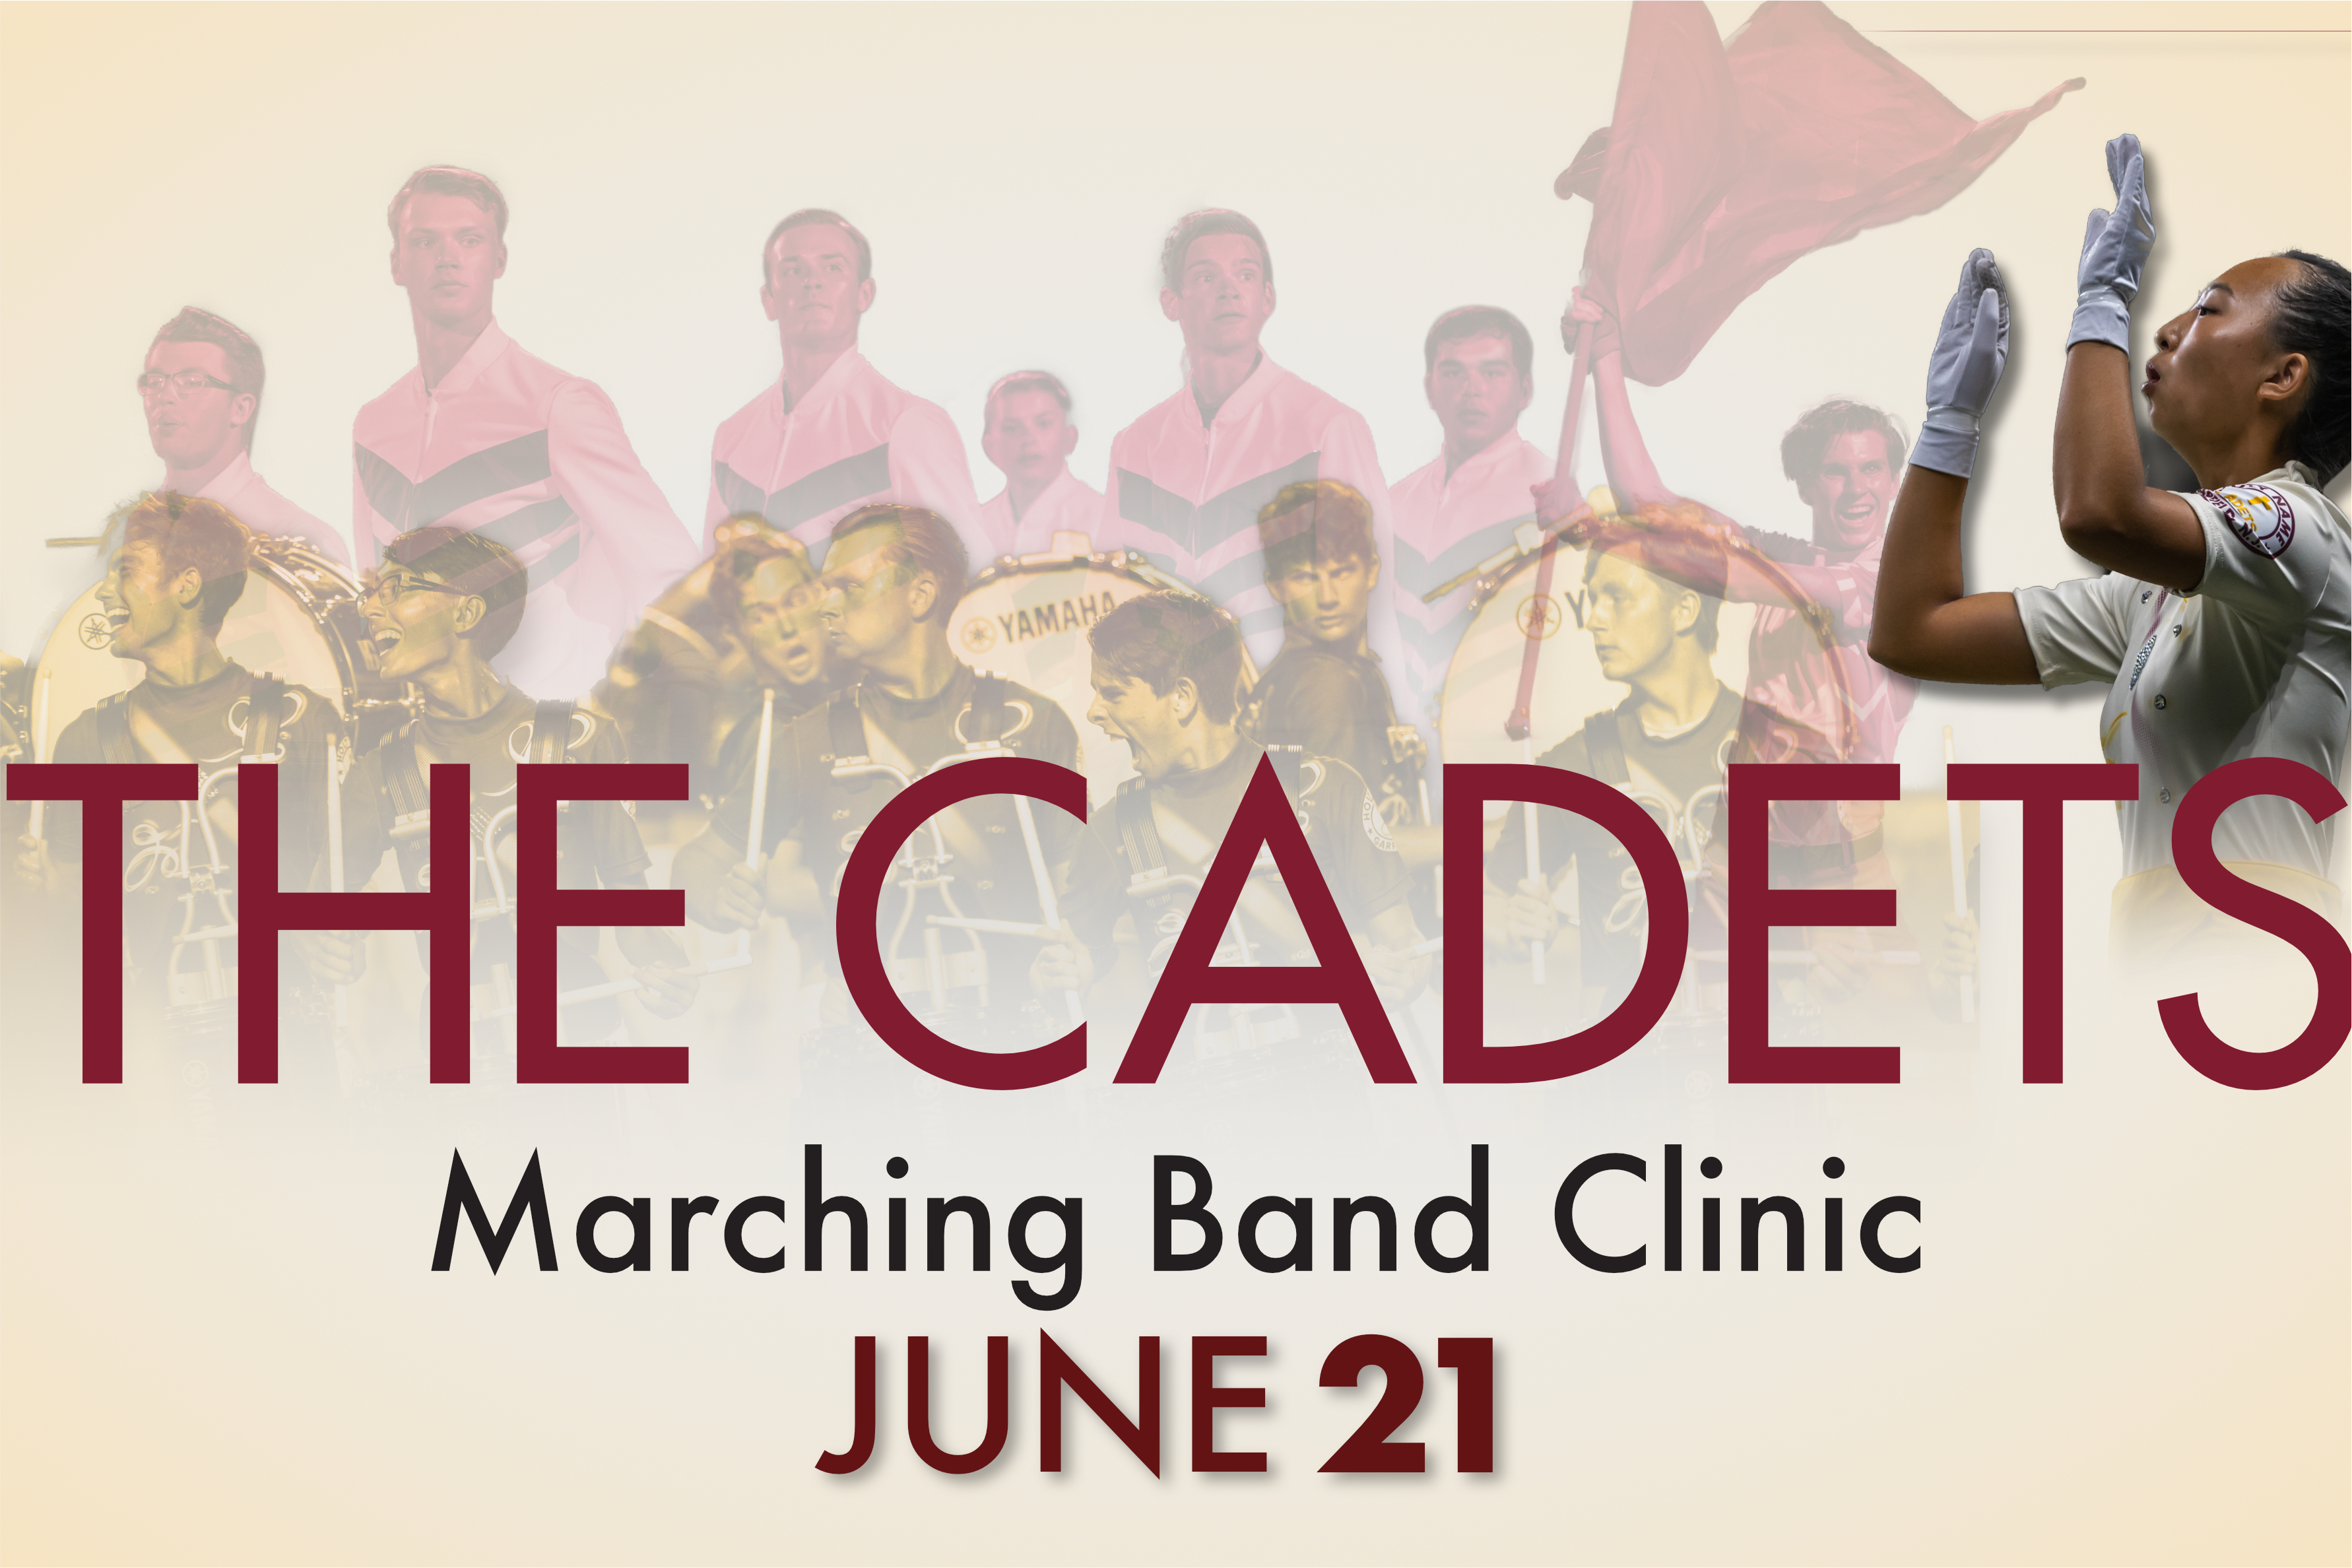 Cadets Clinic 2023